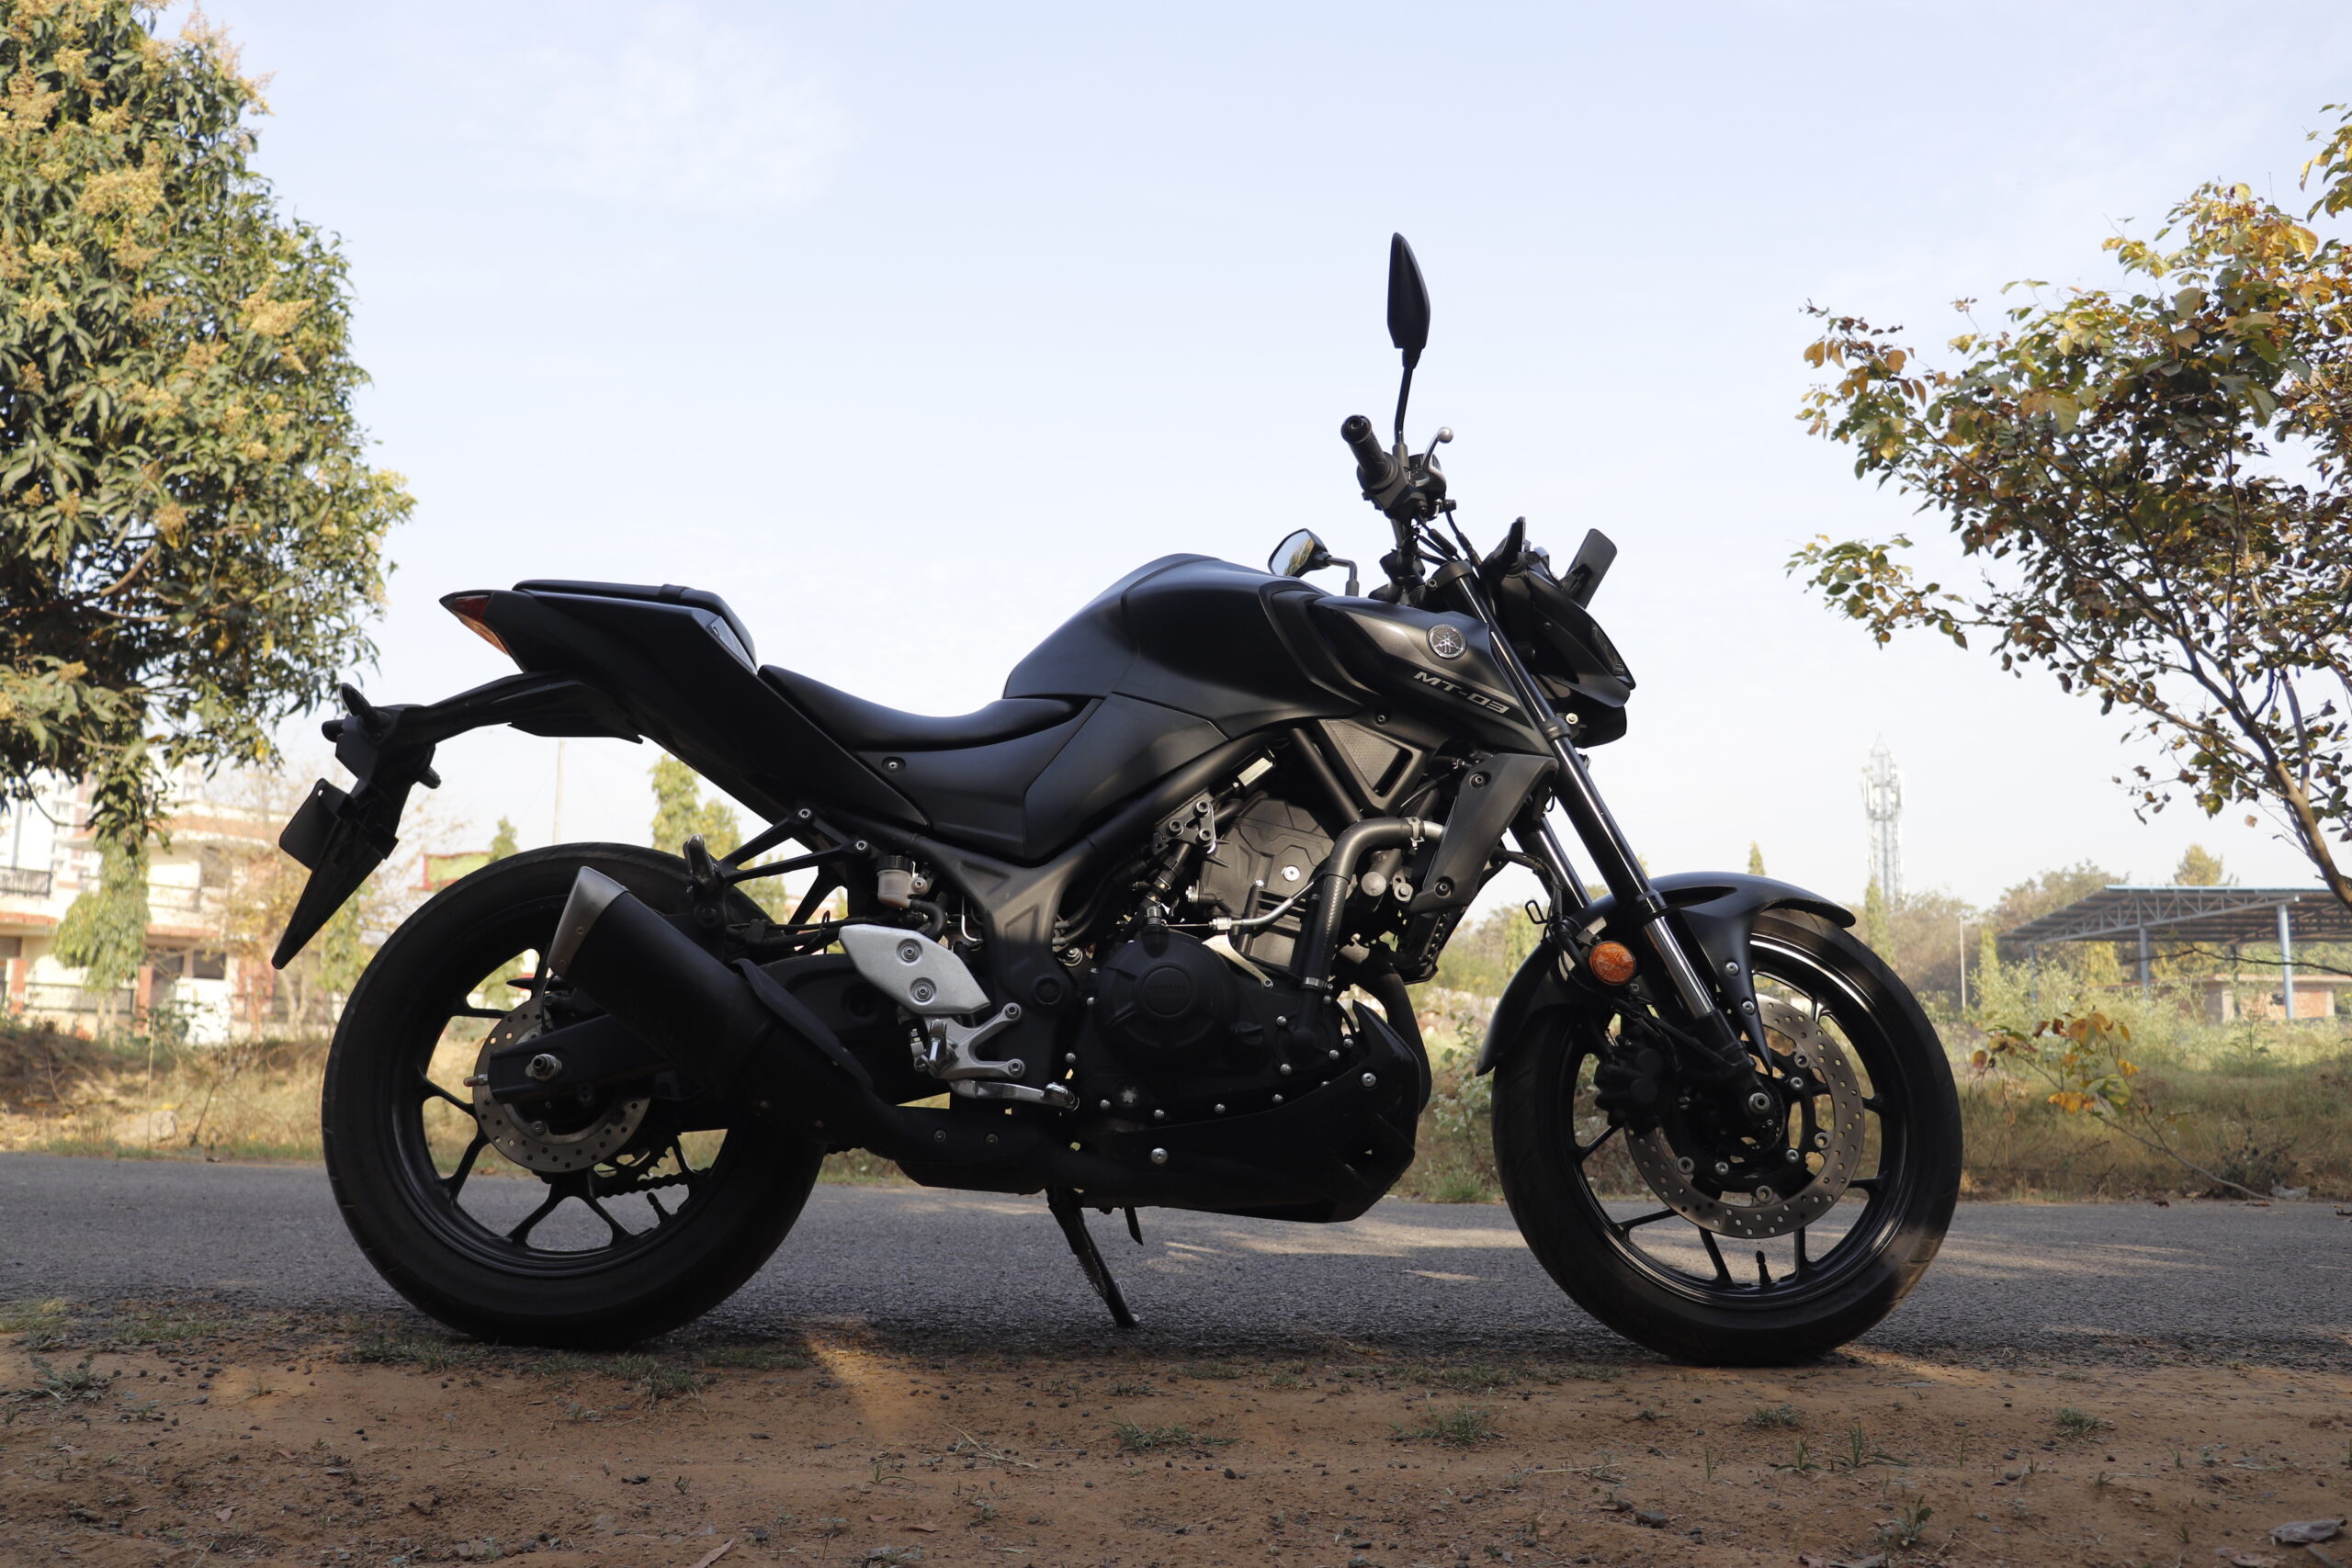 Yamaha MT-03 Review: An anachronism trying to be relevant?